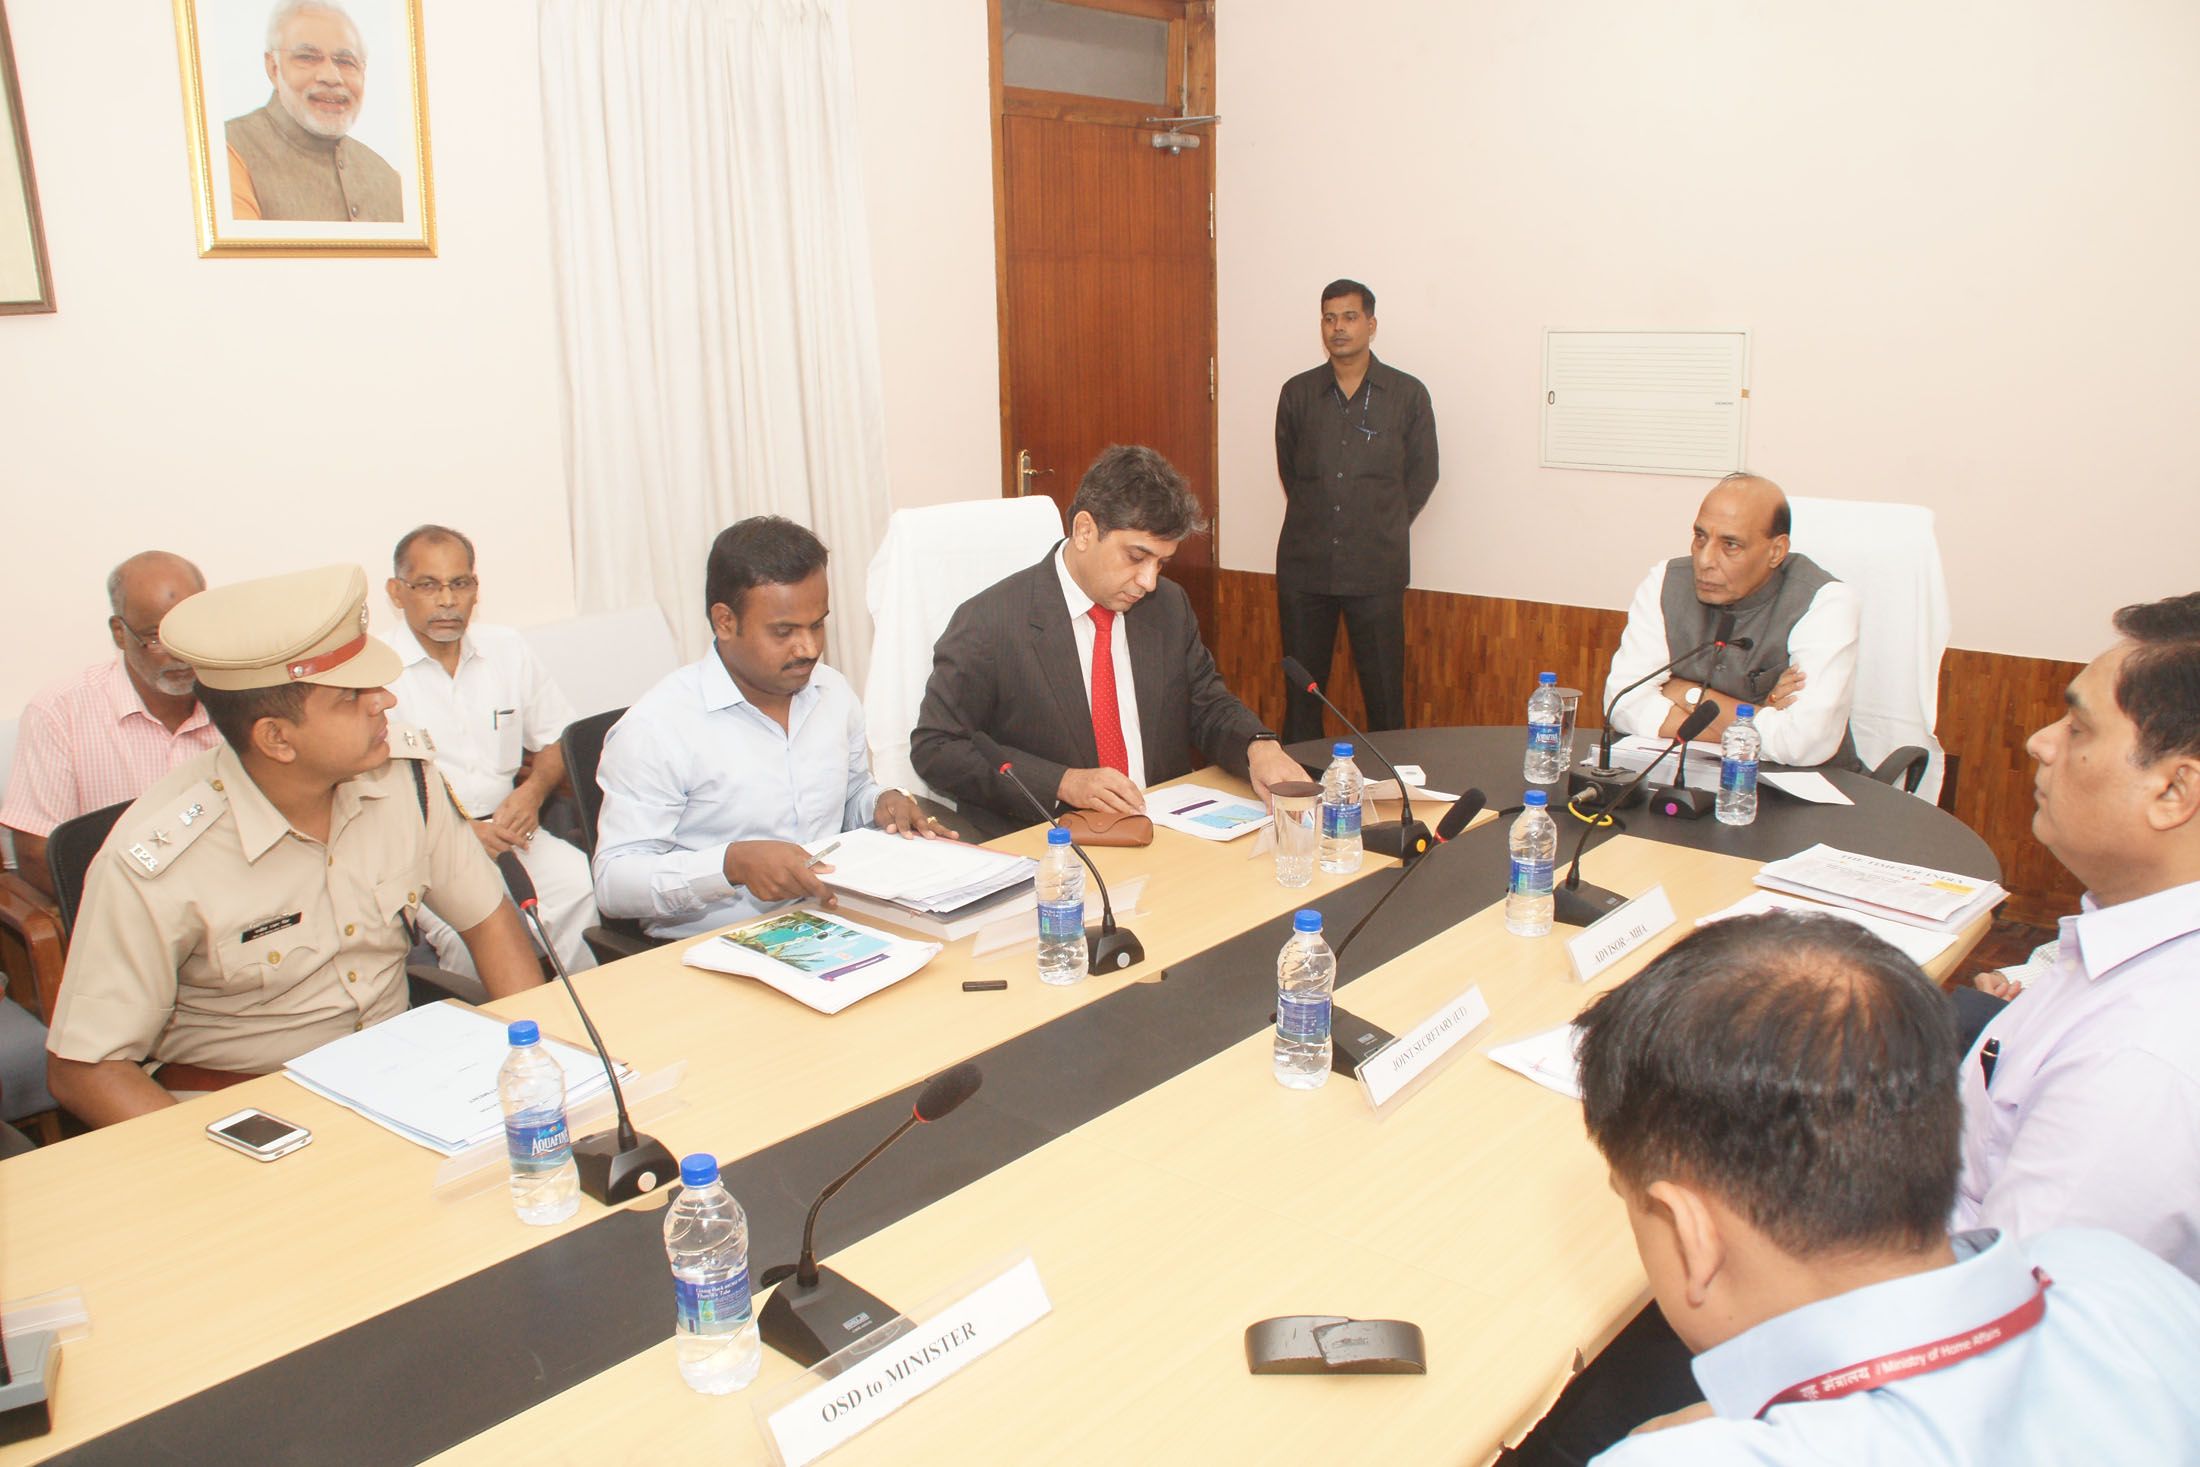 The Union Home Minister, Shri Rajnath Singh chairing a meeting to review the development programmes and coastal security with Administrator and other senior Government officials of Lakshadweep, at Kavaratti, Lakshadweep on February 06, 2016.